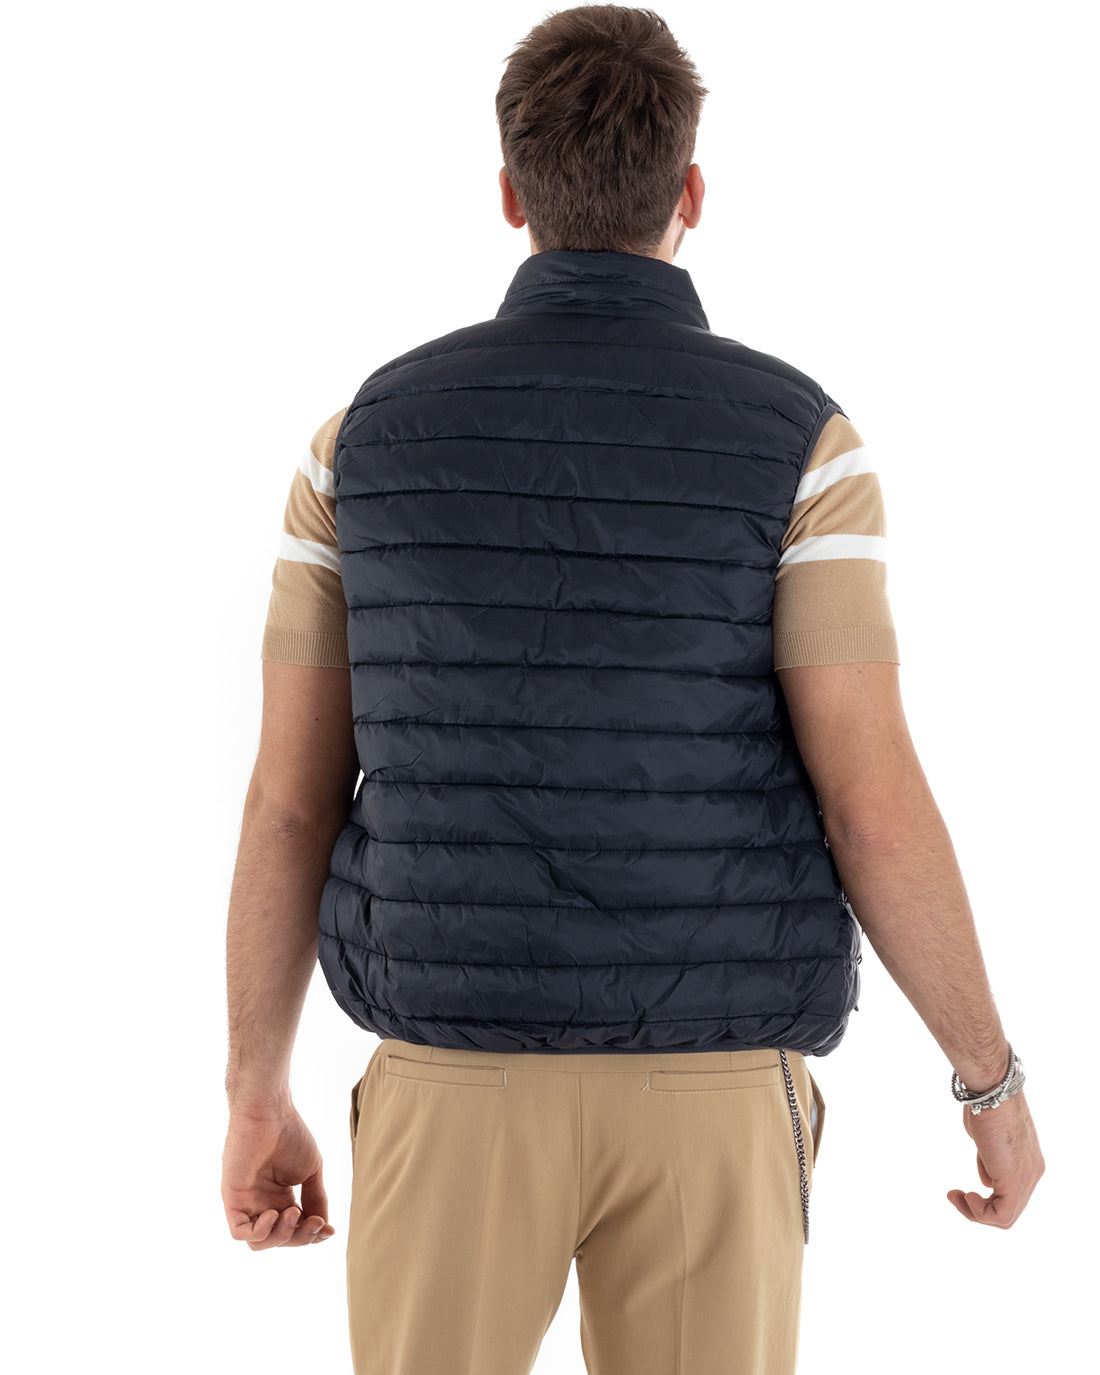 Men's Vest Armhole Jacket Solid Color Blue Casual Basic GIOSAL-G3036A